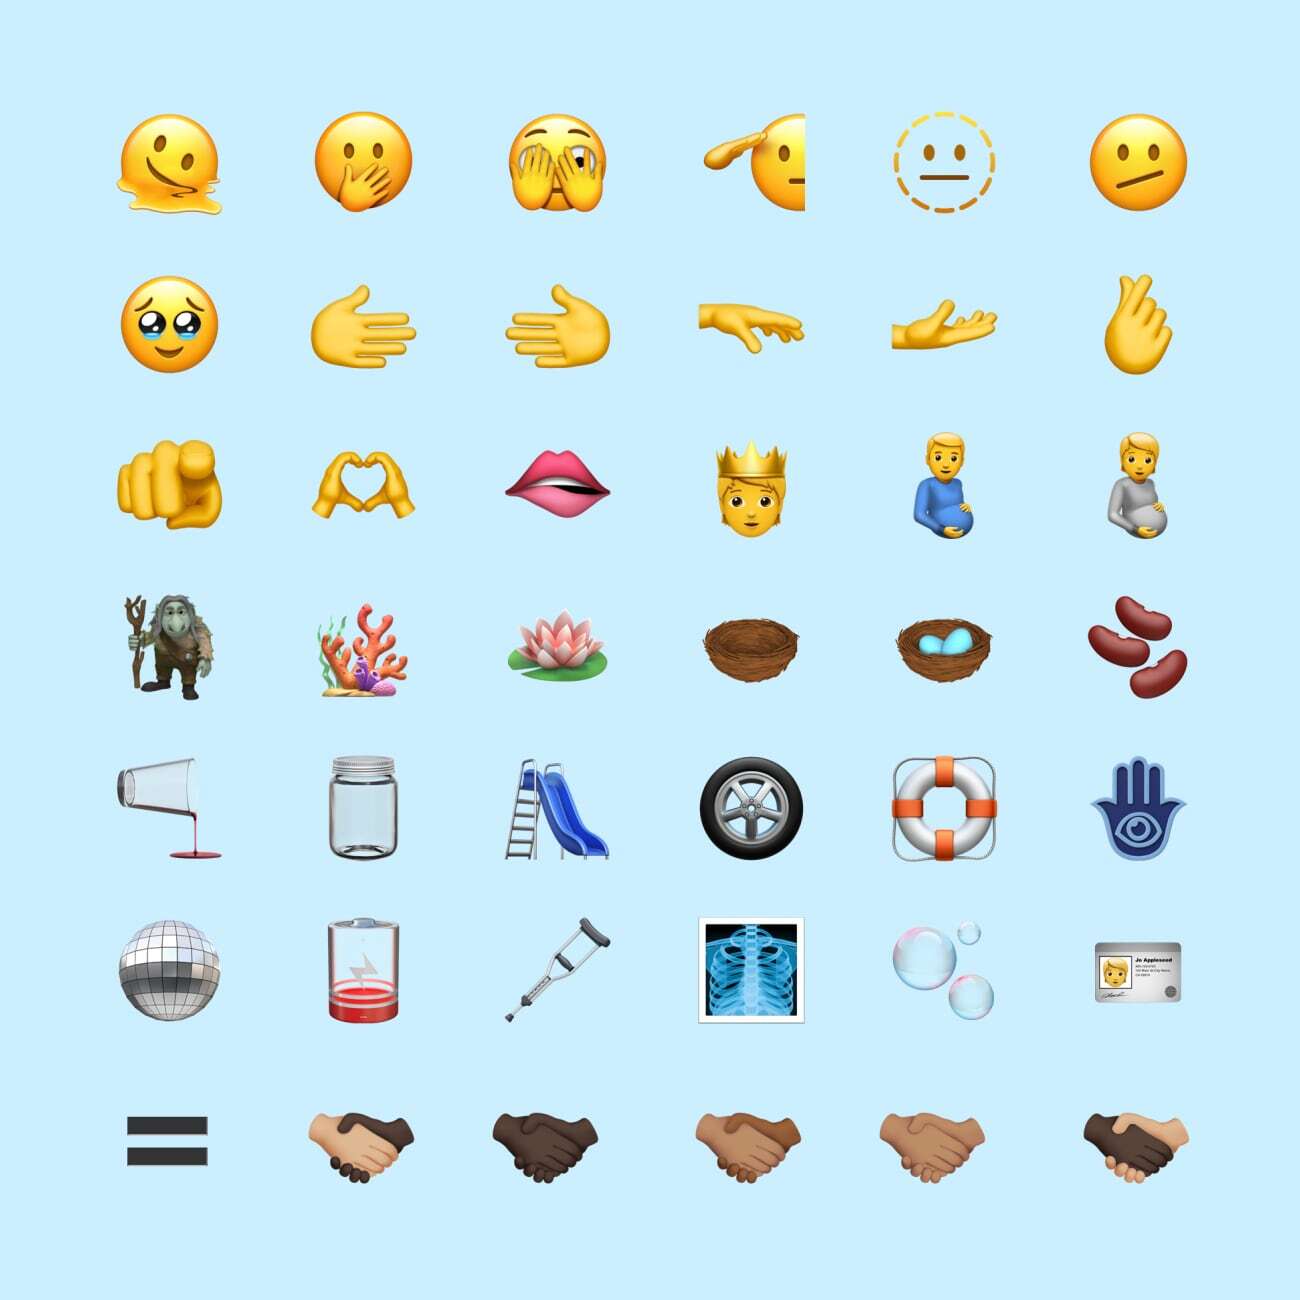 Rows of emojis including biting lip, a troll, coral, lotus flower, bird nests, beans, glass spilling water, slide, tire, ring buoy, hamsa, disco ball, low battery, crutch, X-ray, bubbles, ID card, and heavy equal sign.